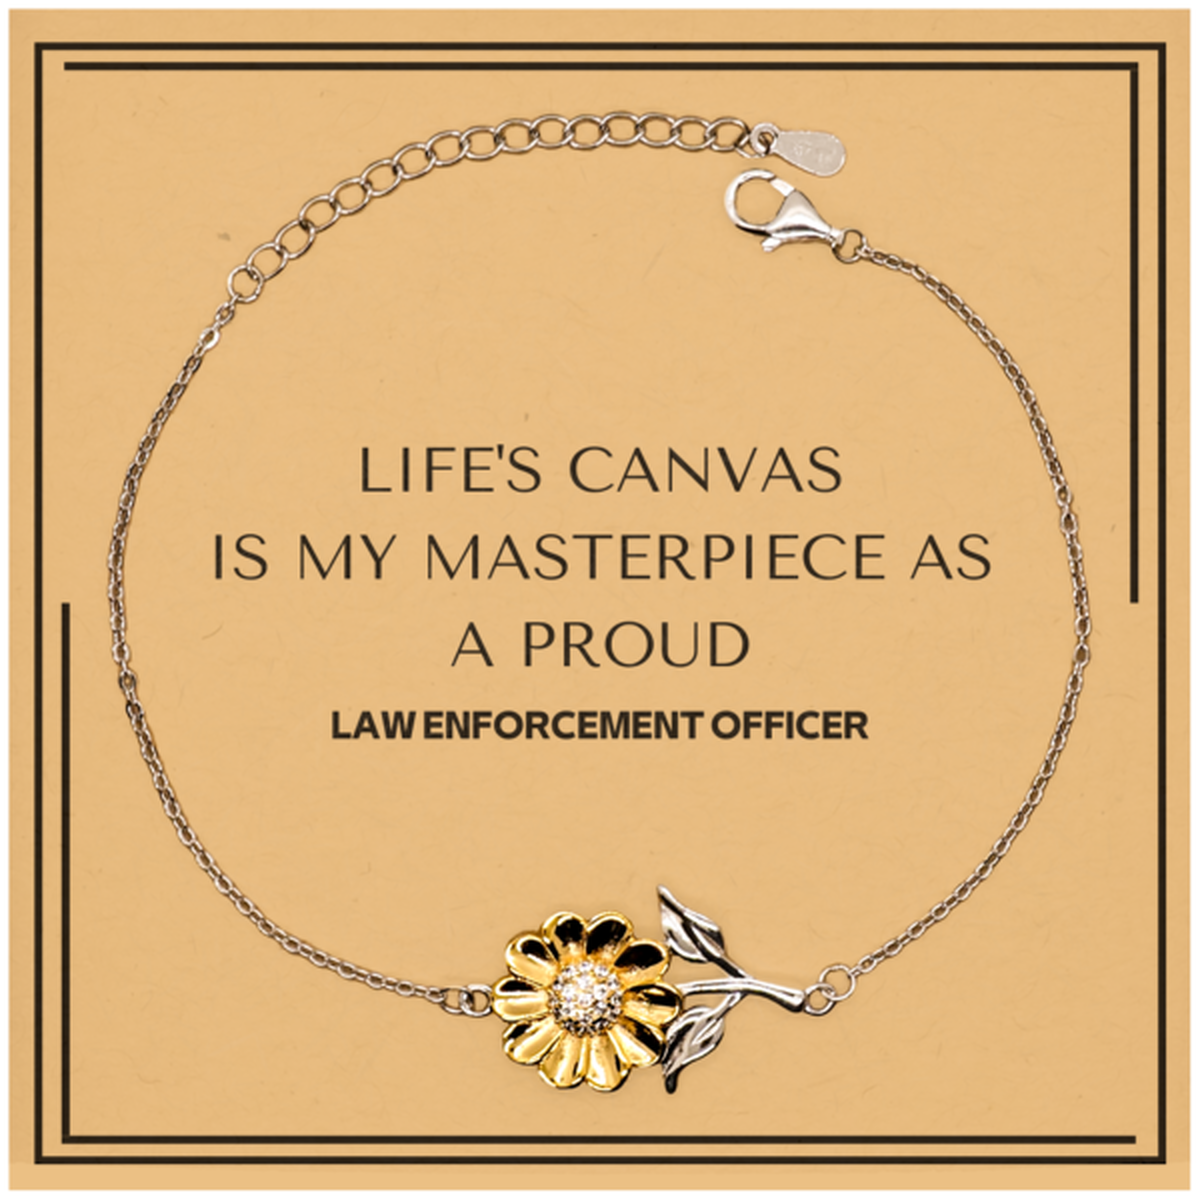 Proud Law Enforcement Officer Gifts, Life's canvas is my masterpiece, Epic Birthday Christmas Unique Sunflower Bracelet For Law Enforcement Officer, Coworkers, Men, Women, Friends